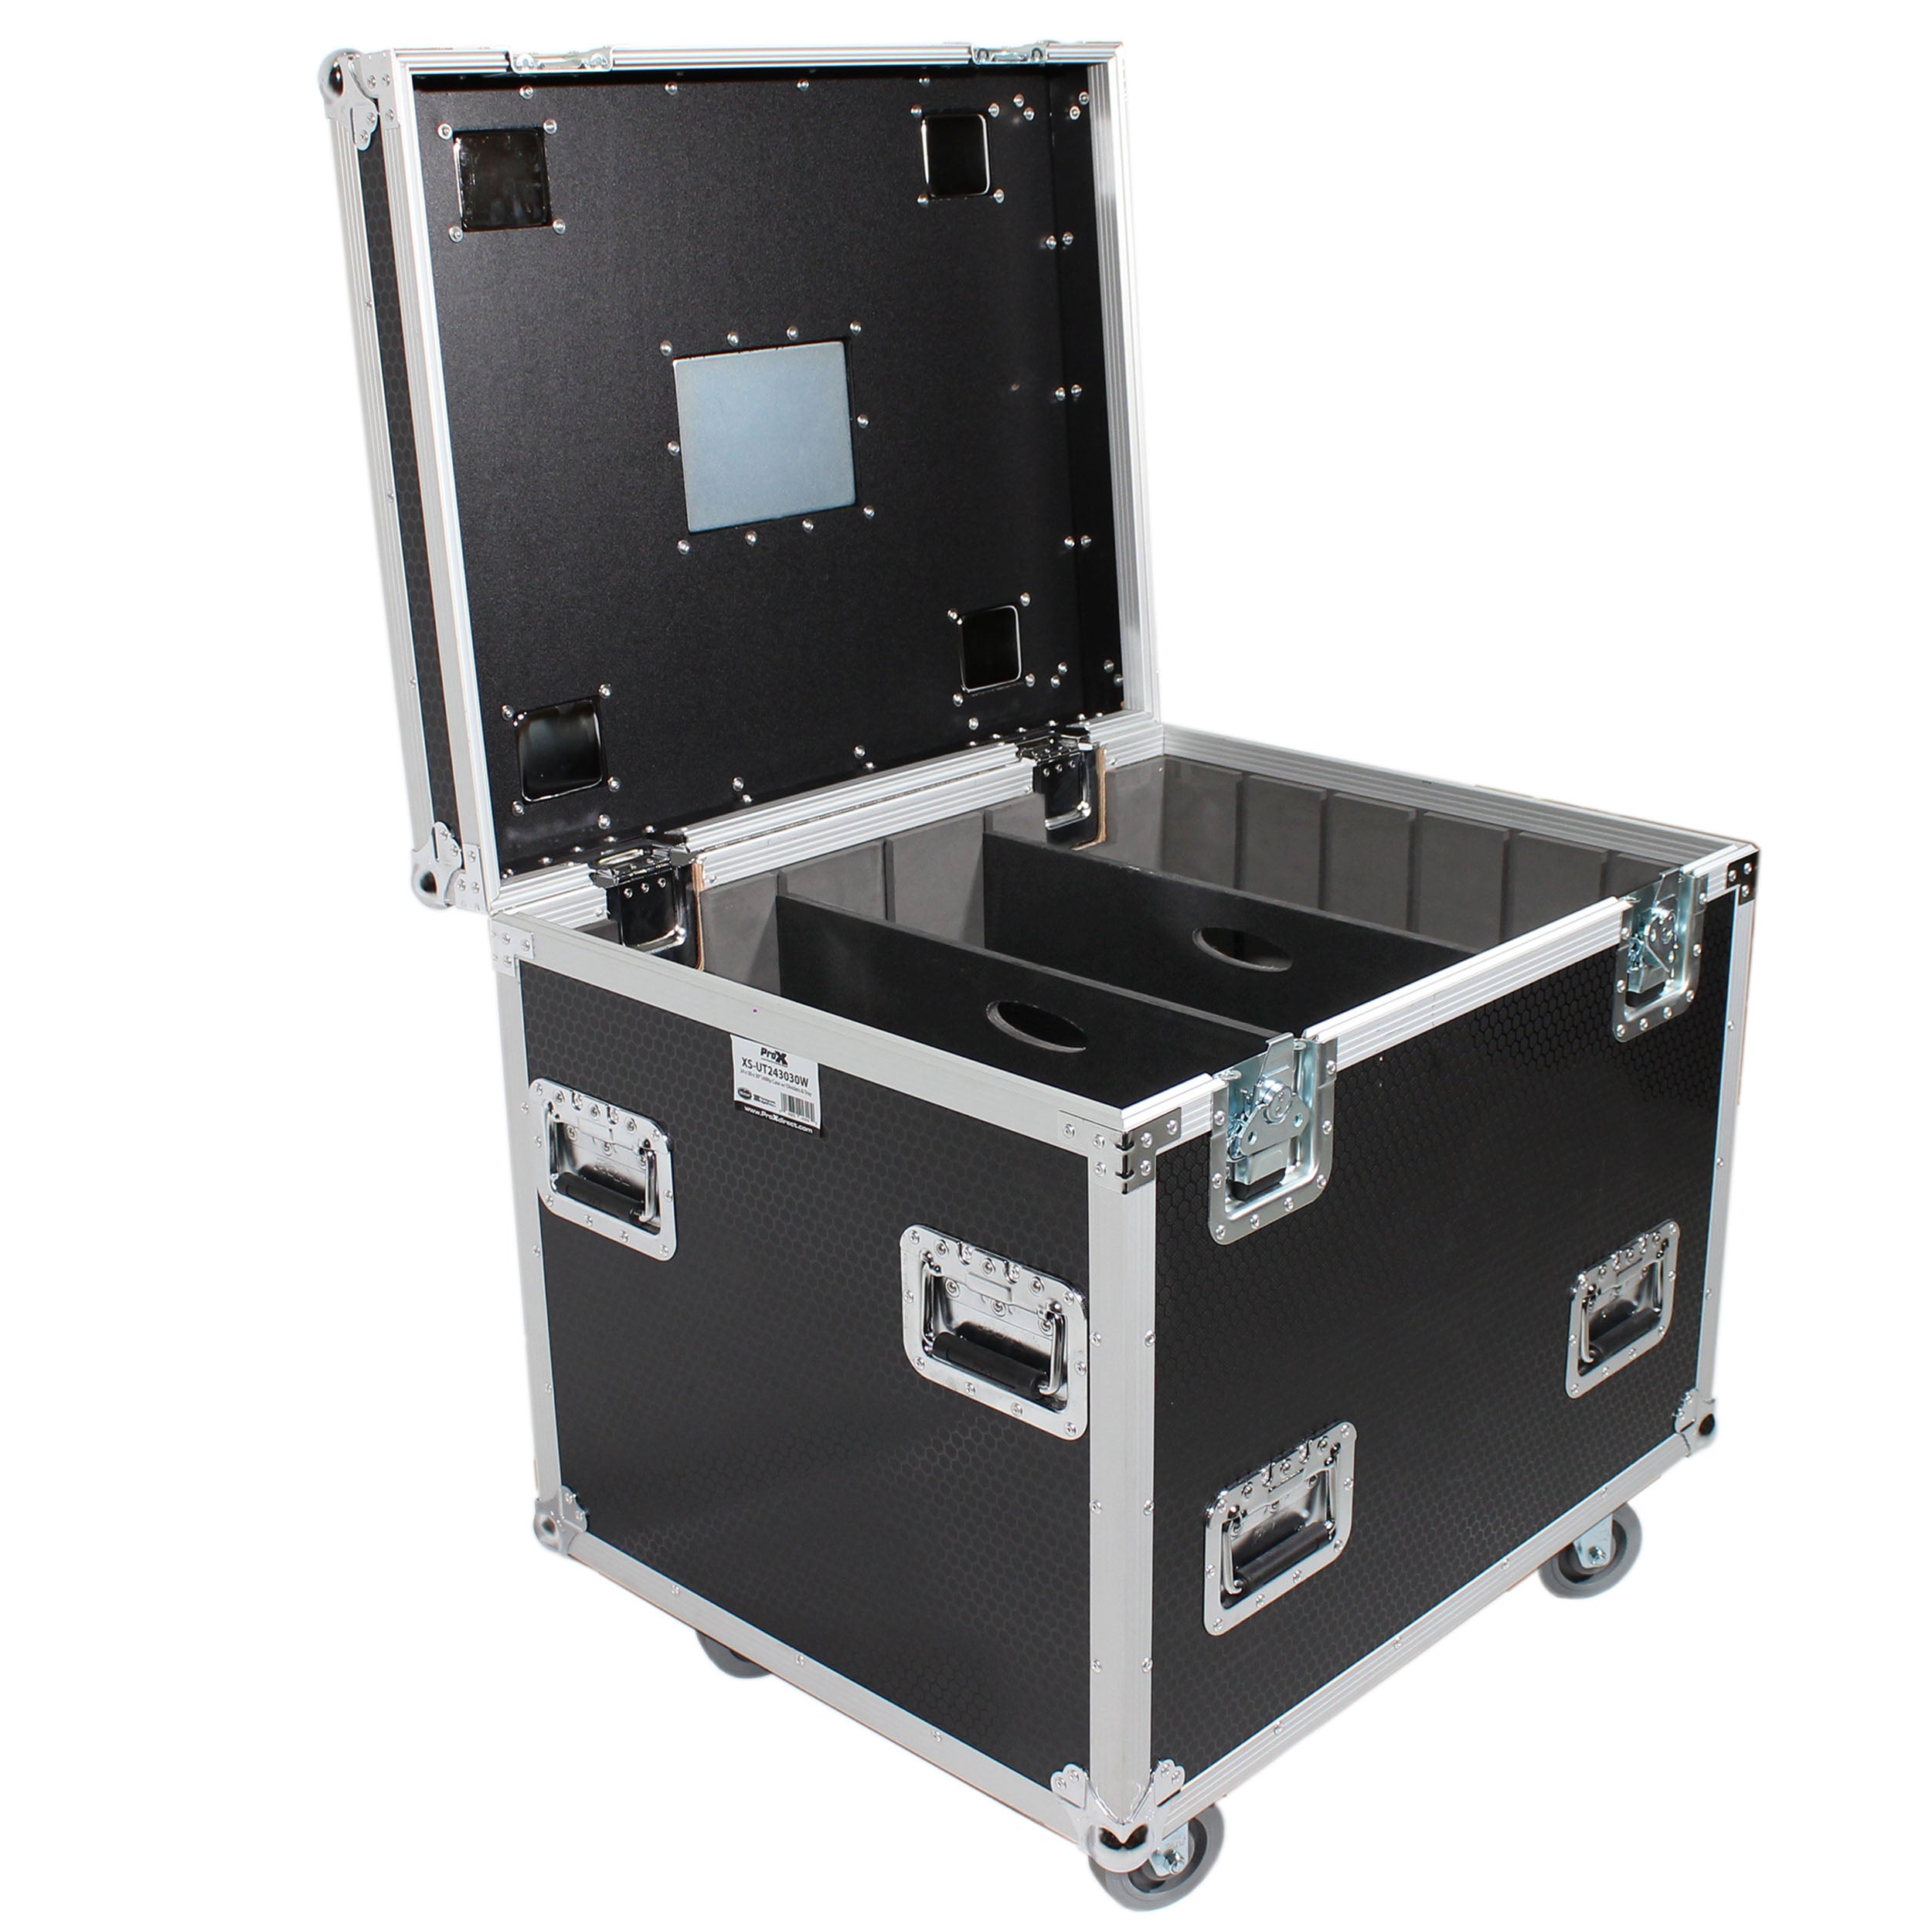 Pro X TruckPax Utility ATA Flight Case Truck Storage Road Case with Dividers Tray and 4" in casters – 24"x30"x30" Ext XS-UTL243030WMK2